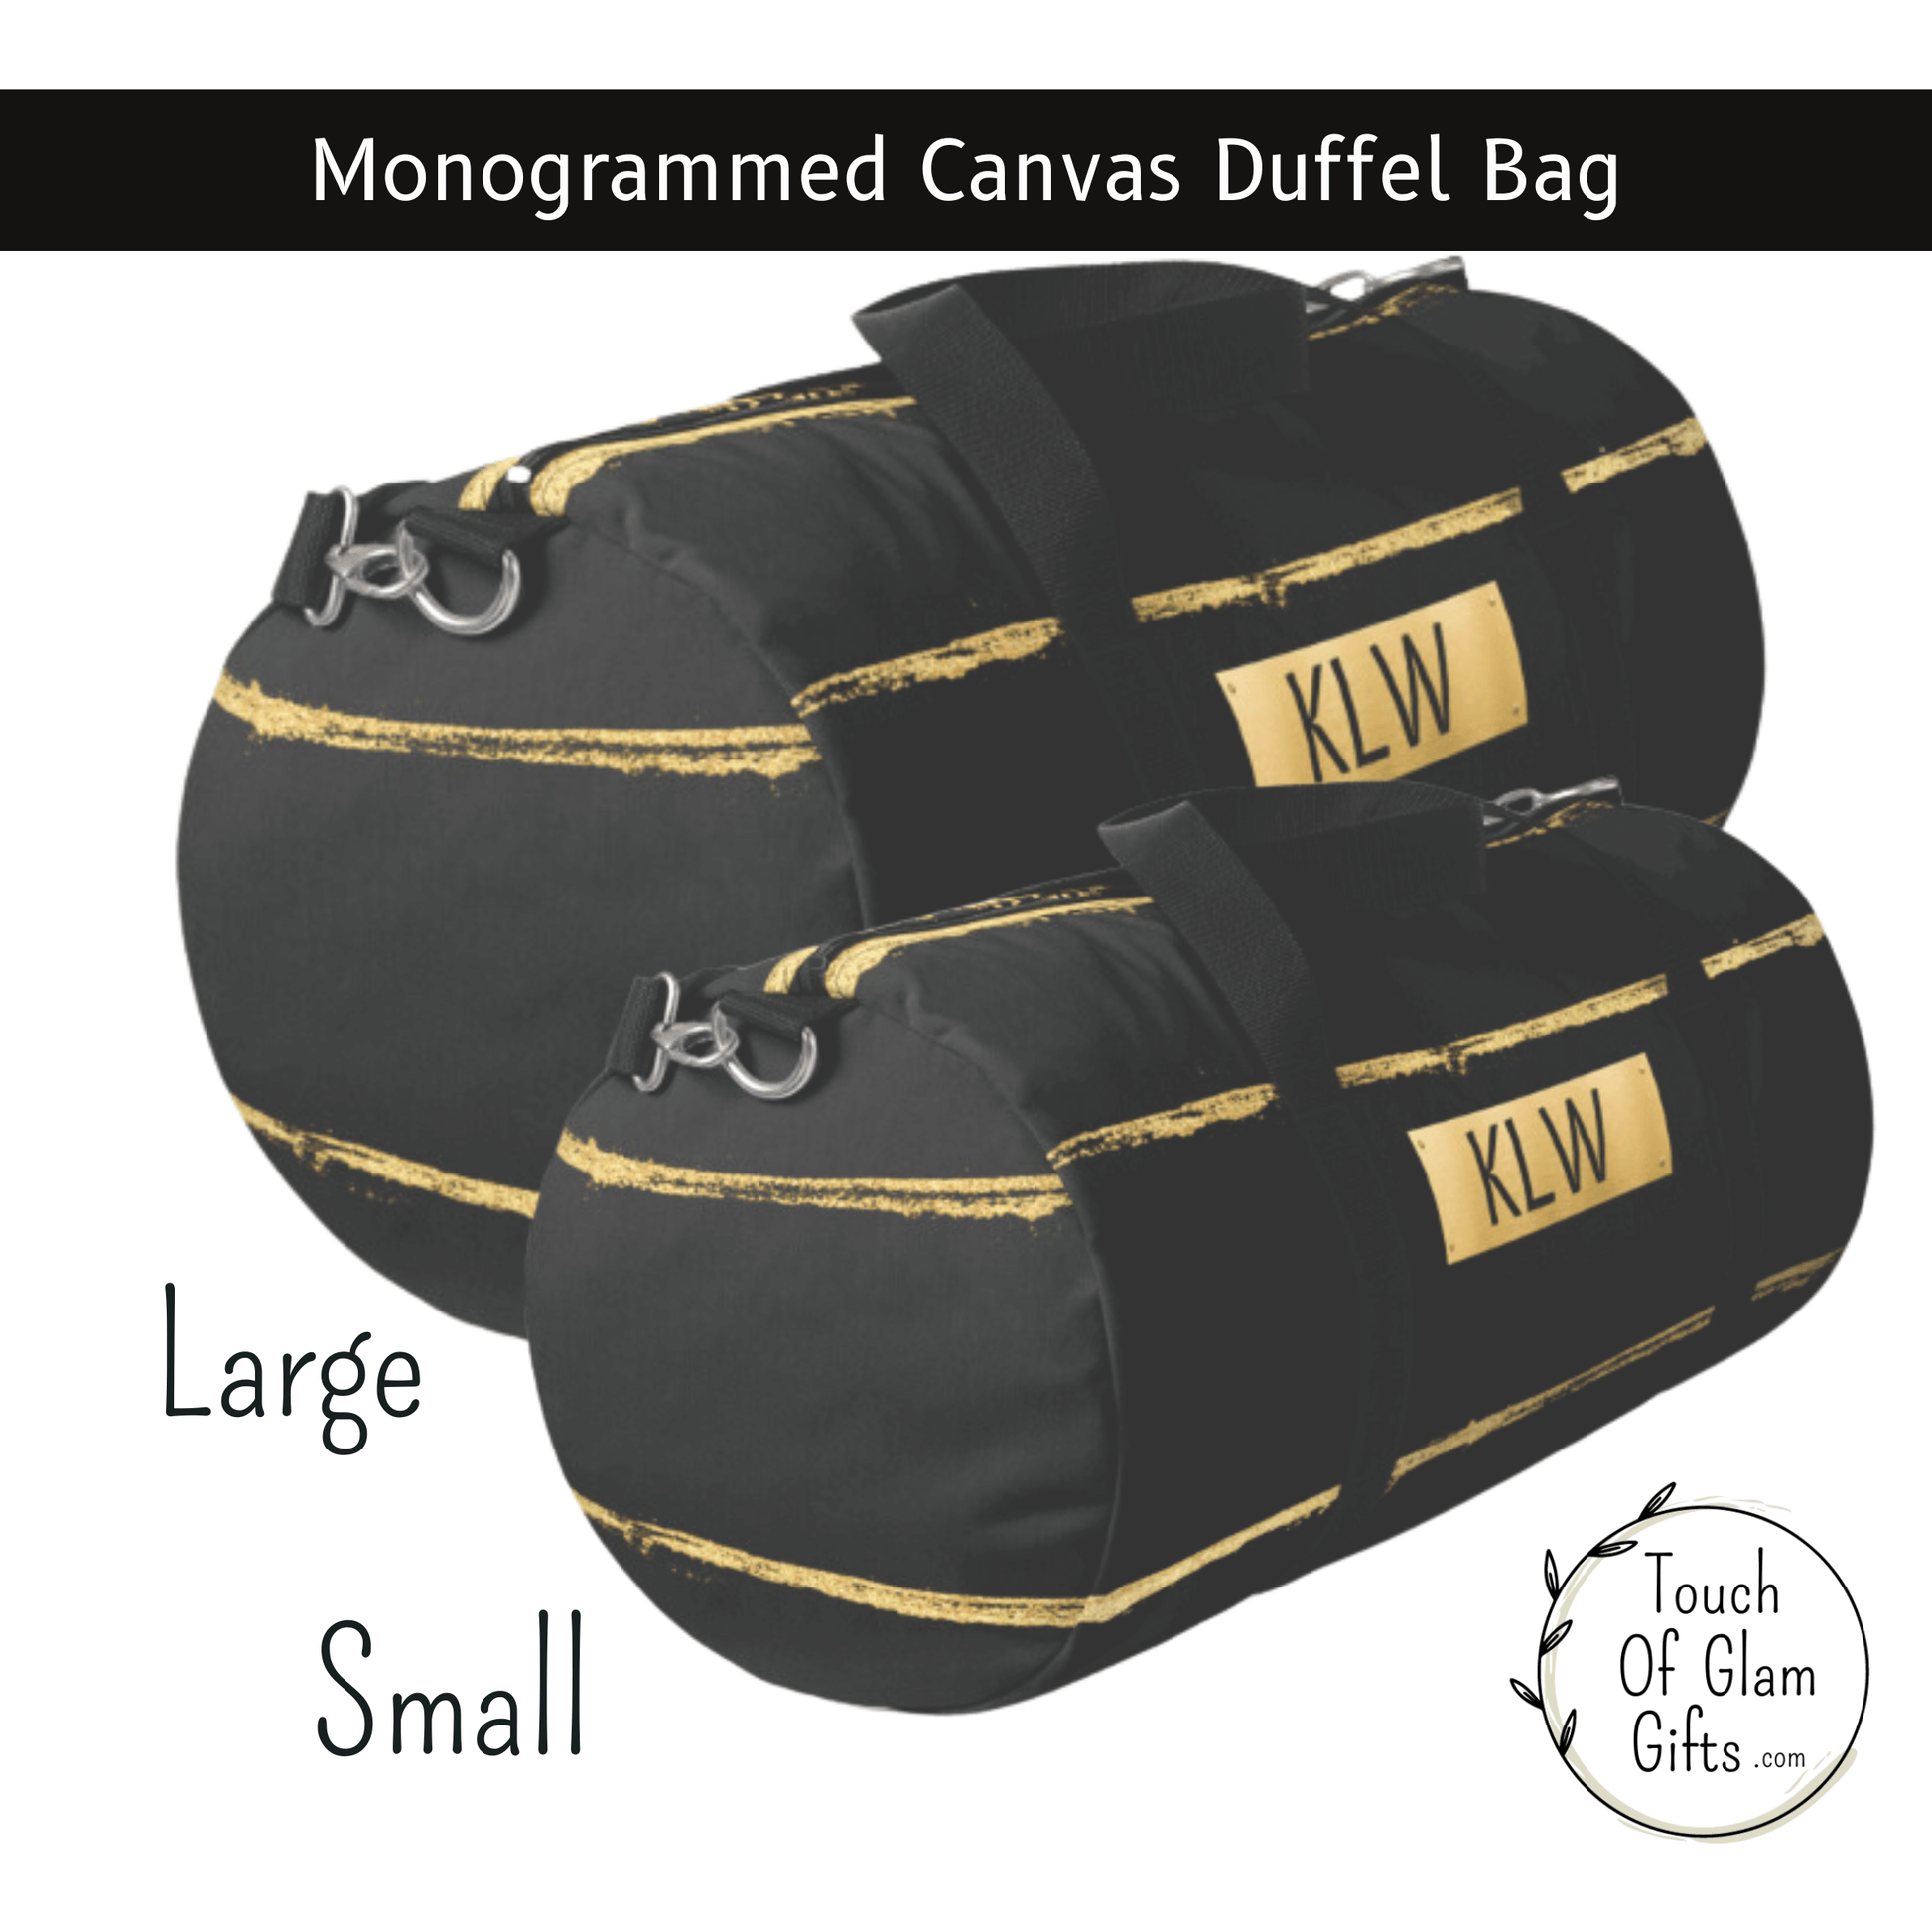 Our light black or charcoal grey monogrammed canvas duffel bag shows the metal hardware clasps for the padded shoulder strap and black handles for easy traveling for the weekend.